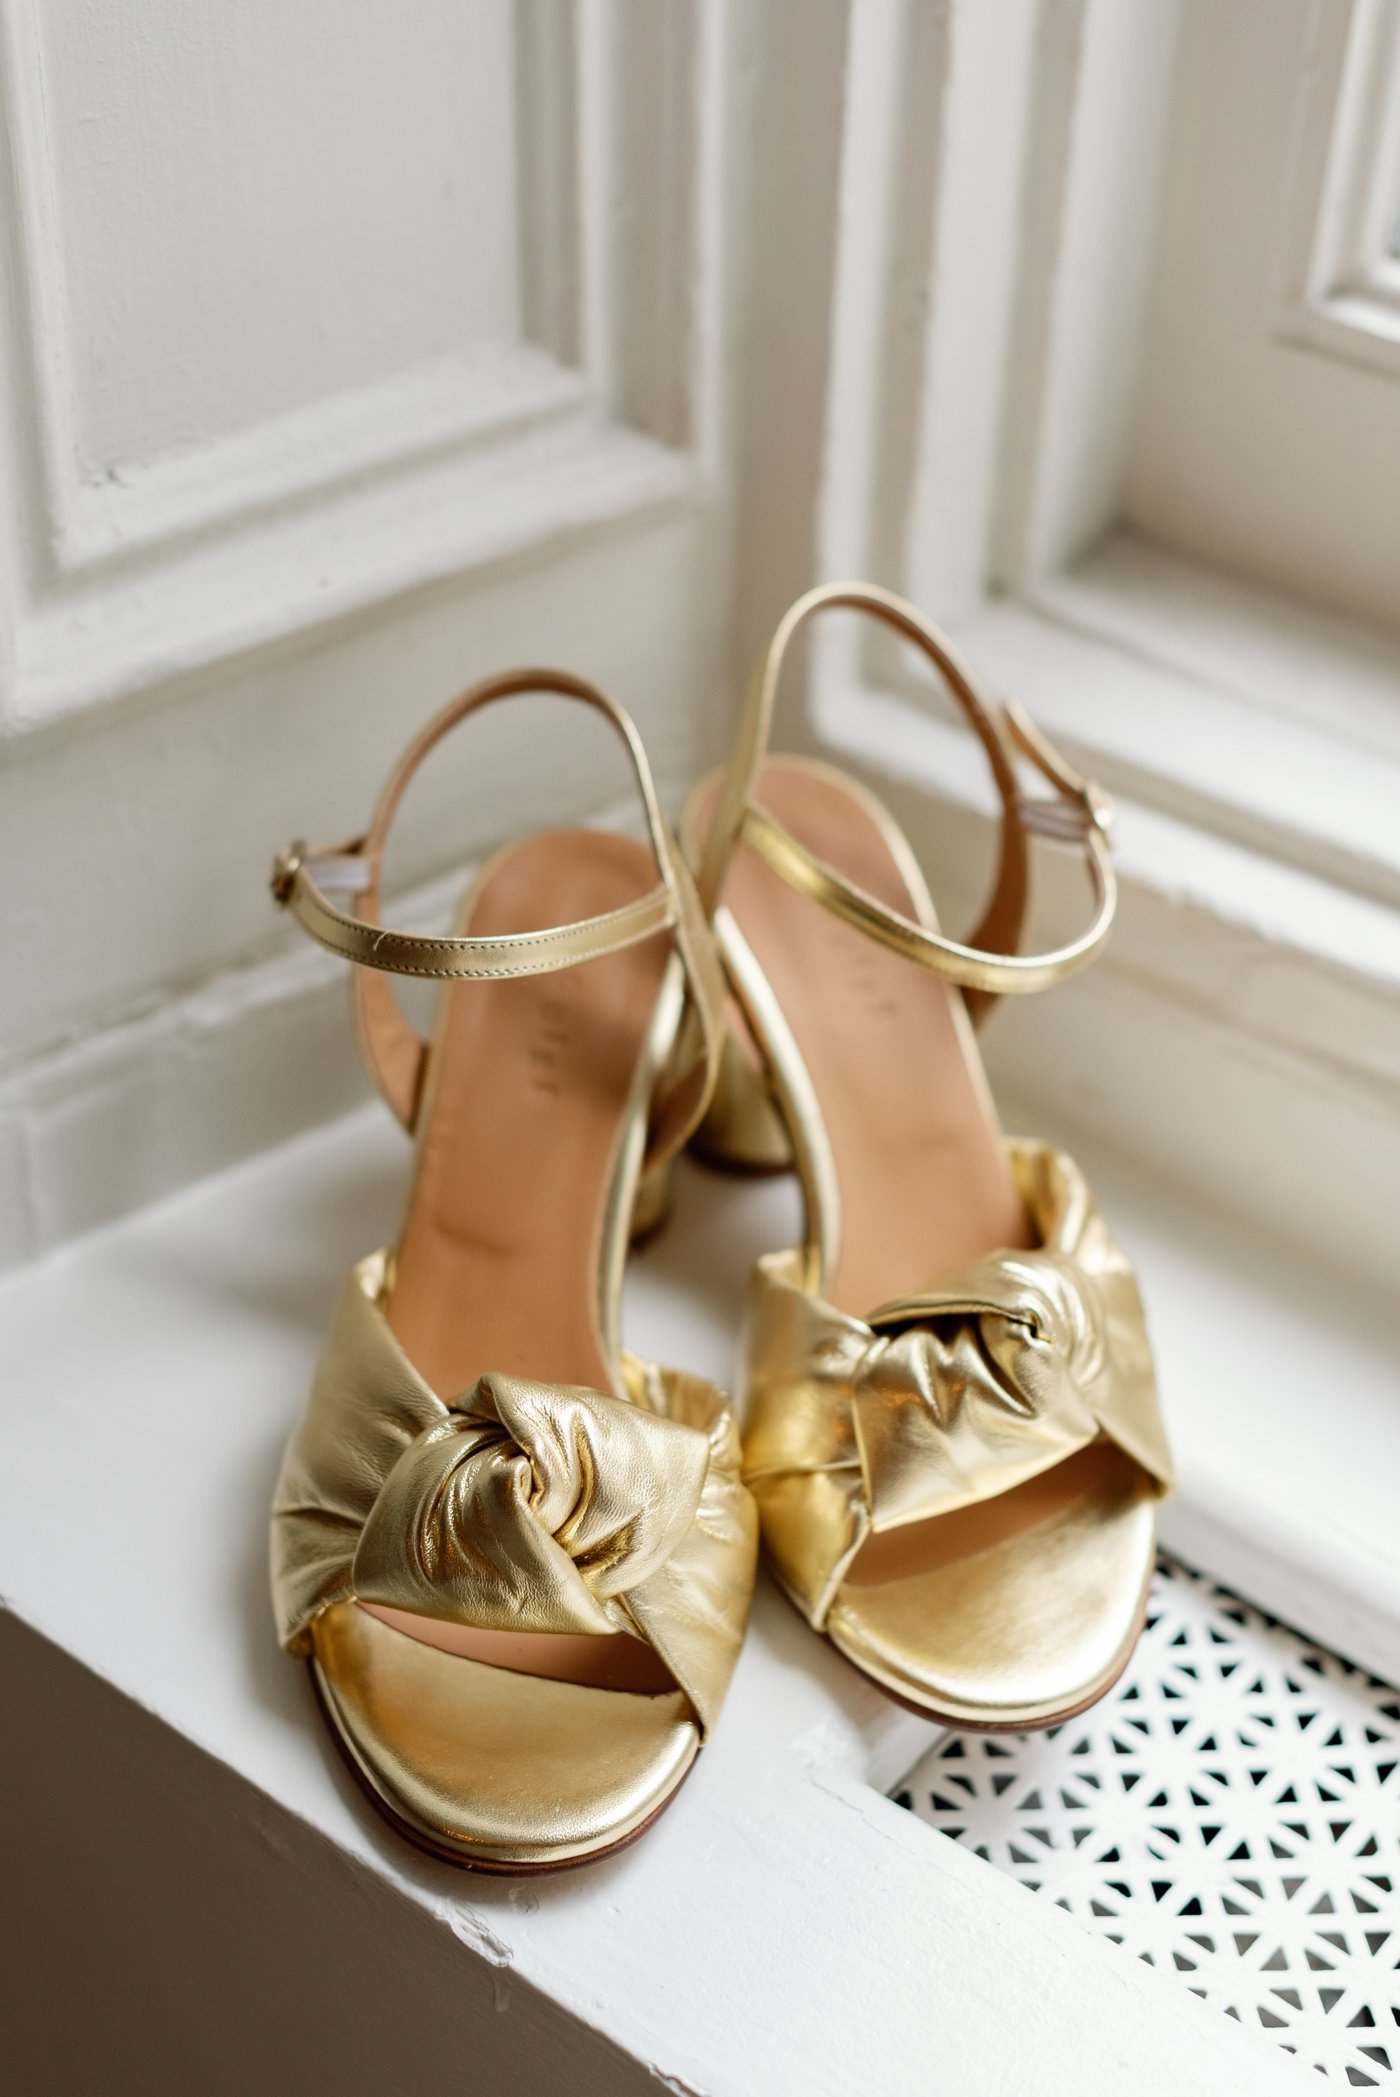 Gold bridal shoes on a windowsill